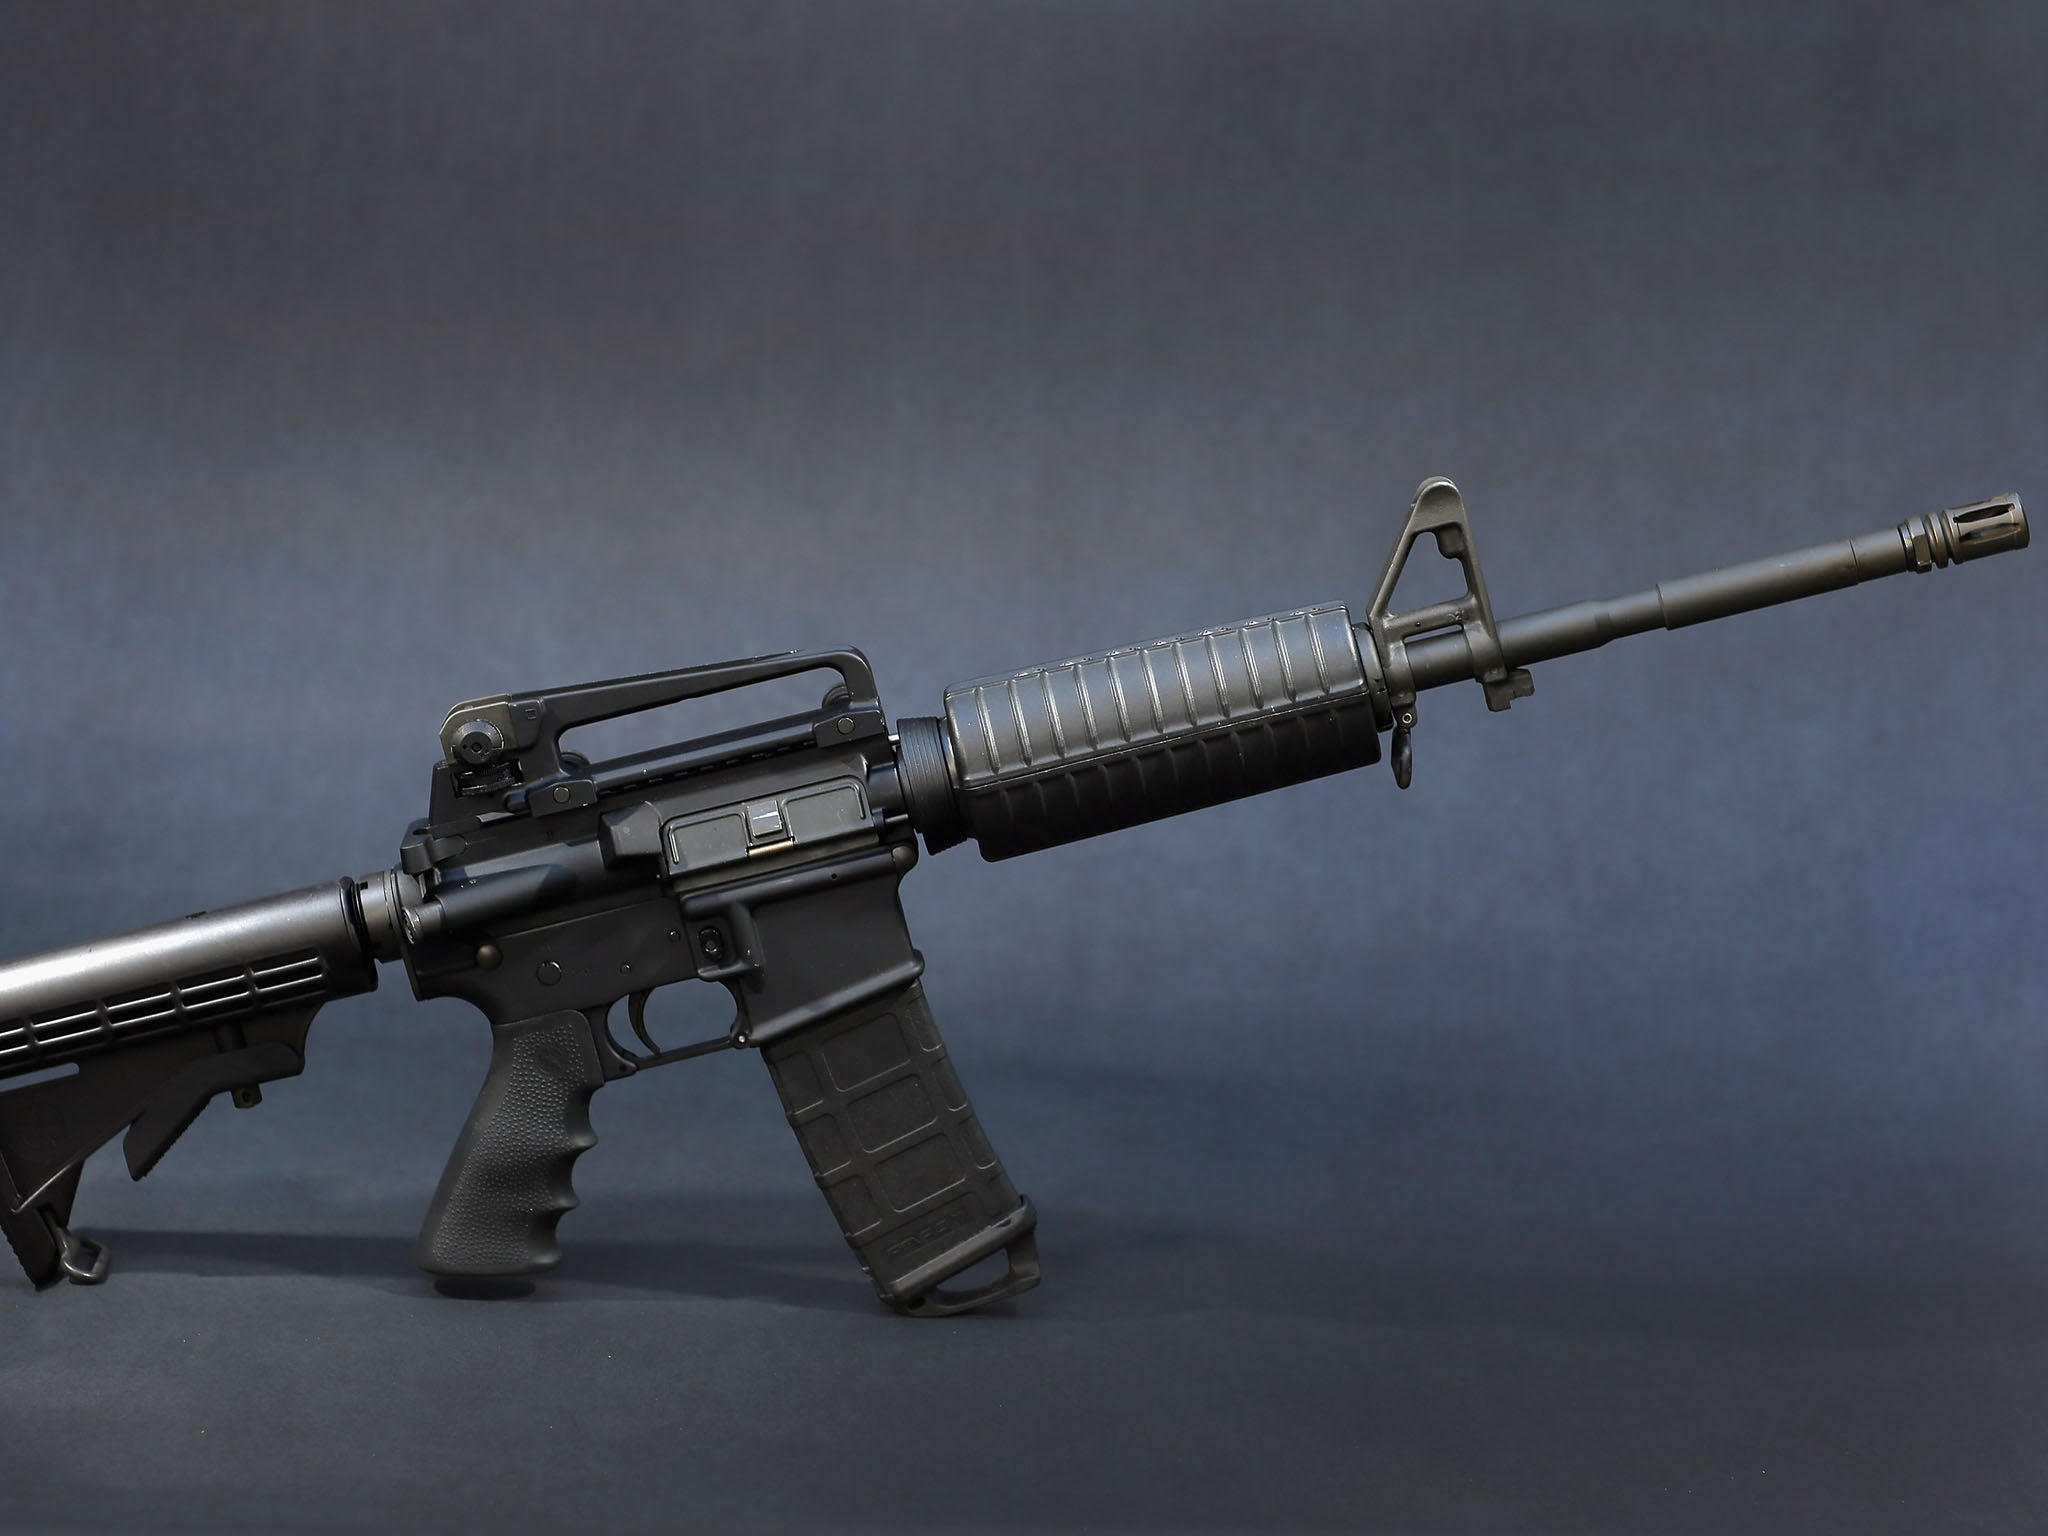 A Rock River Arms AR-15 rifle. The weapon is similar in style to the Bushmaster AR-15 rifle that was used during a massacre at an elementary school in Newtown, Connecticut. Firearm sales have surged recently as speculation of stricter gun laws and a re-in